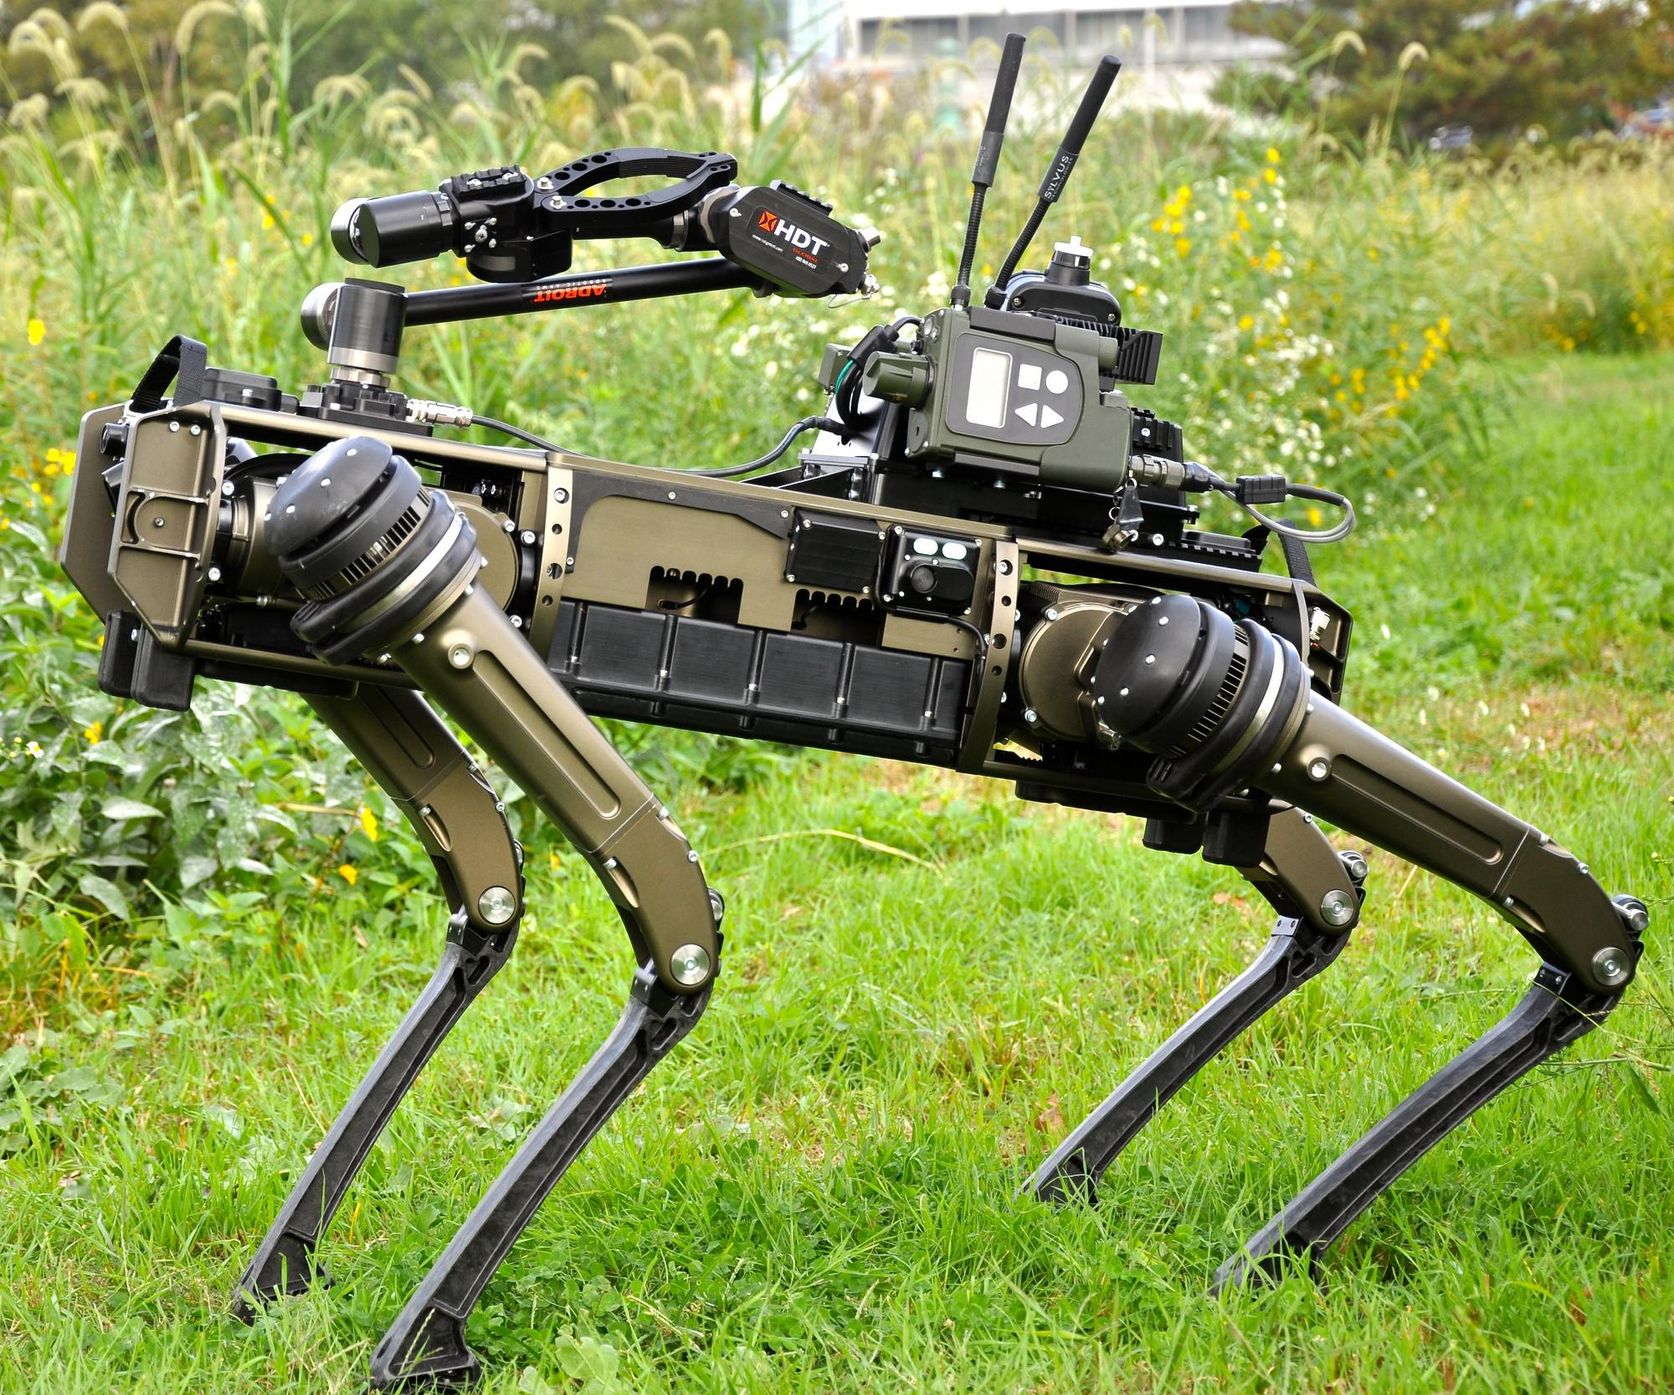 A green quadrupedal robot standing on grass with a robotic arm on its back